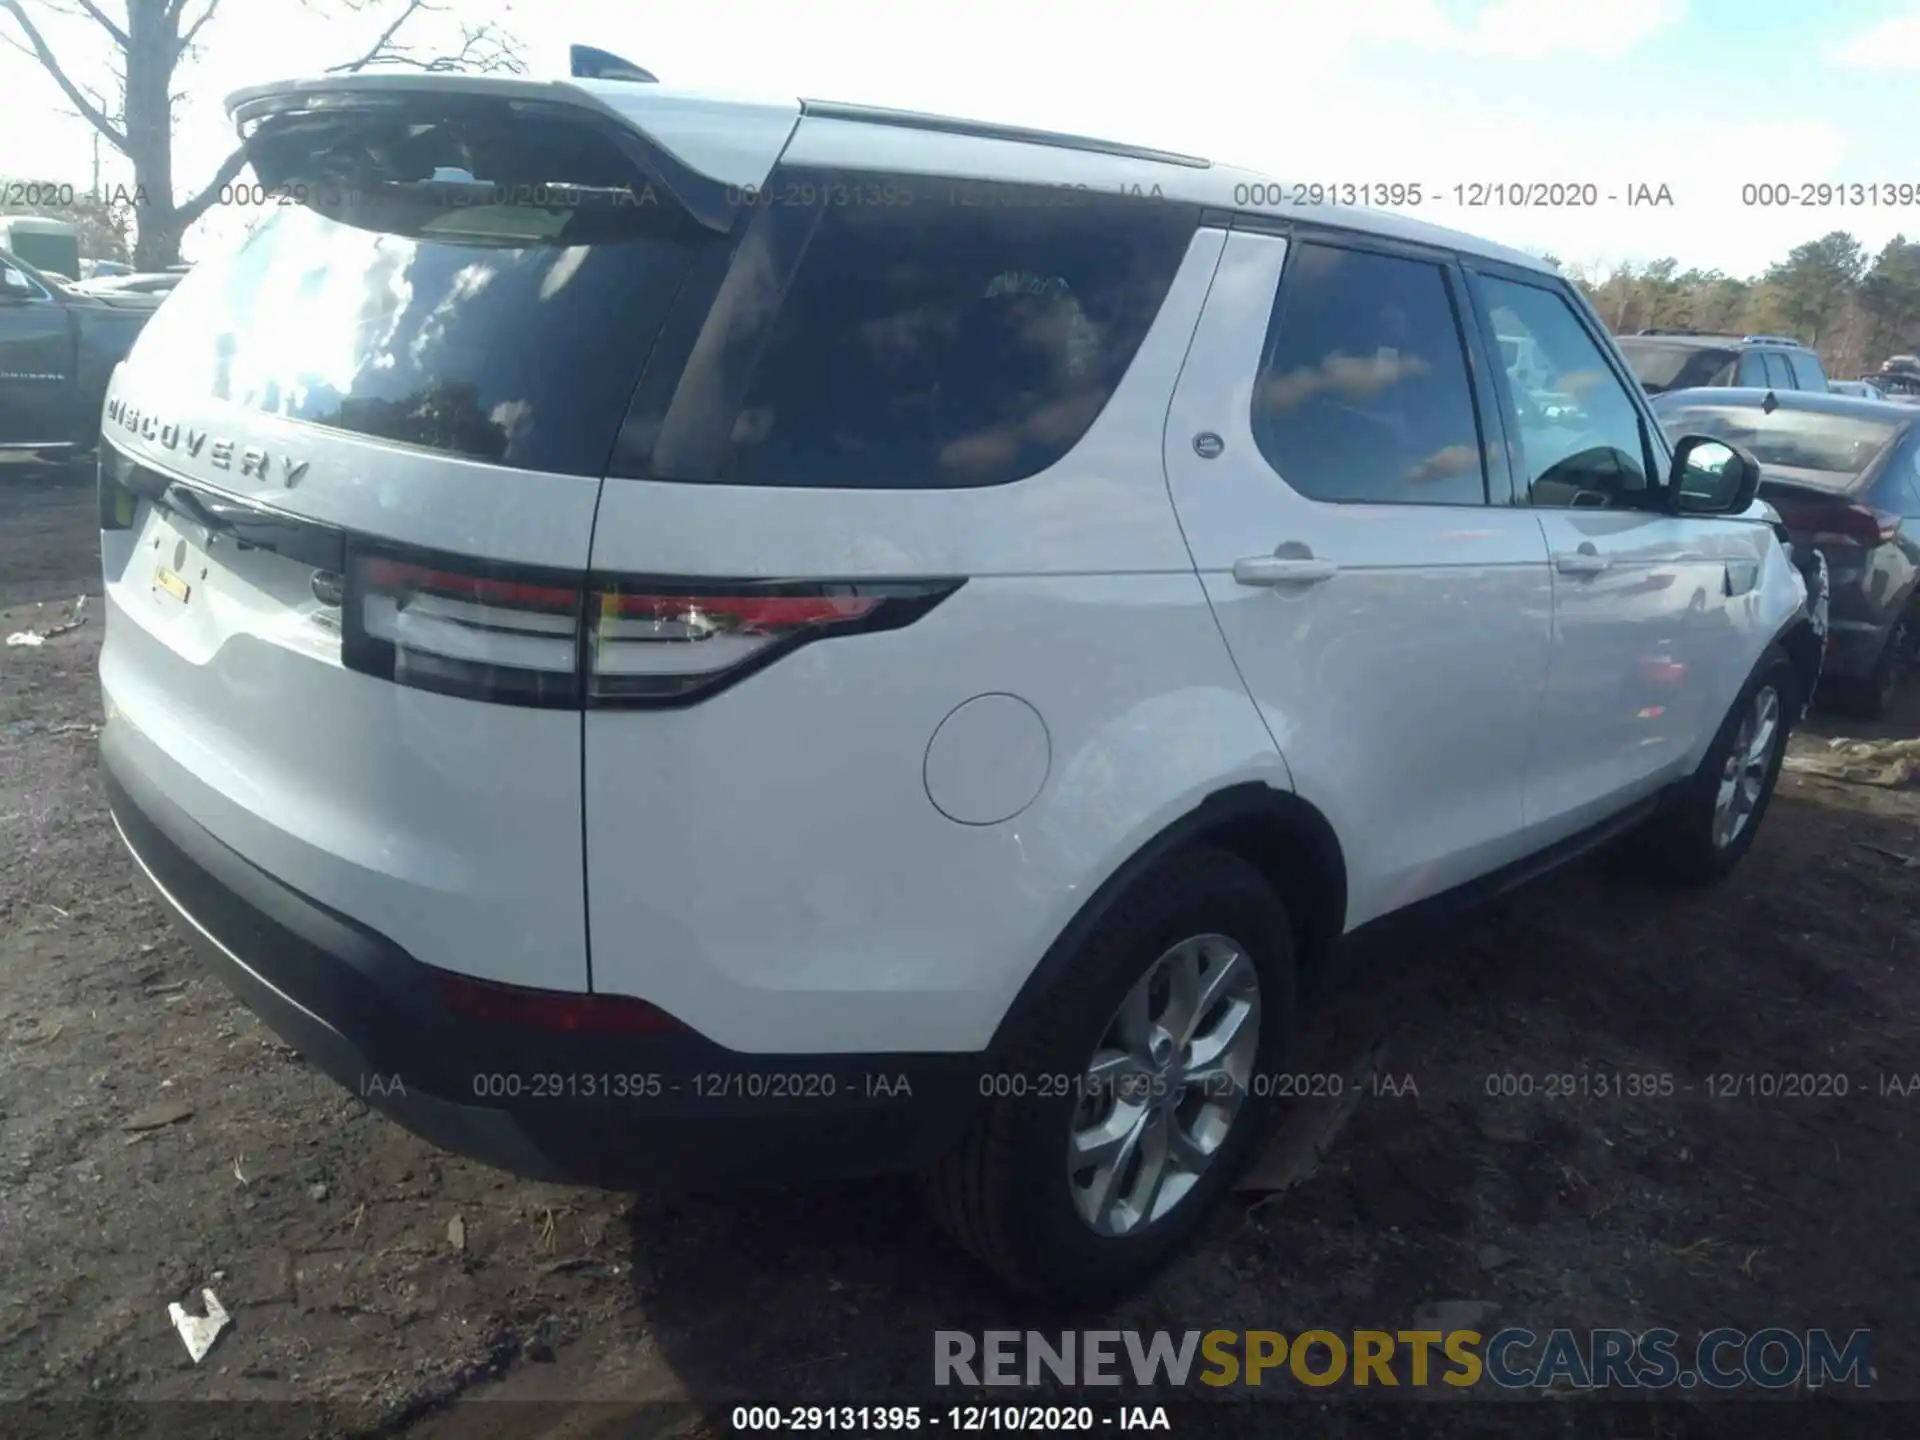 4 Photograph of a damaged car SALRG2RV8L2425285 LAND ROVER DISCOVERY 2020